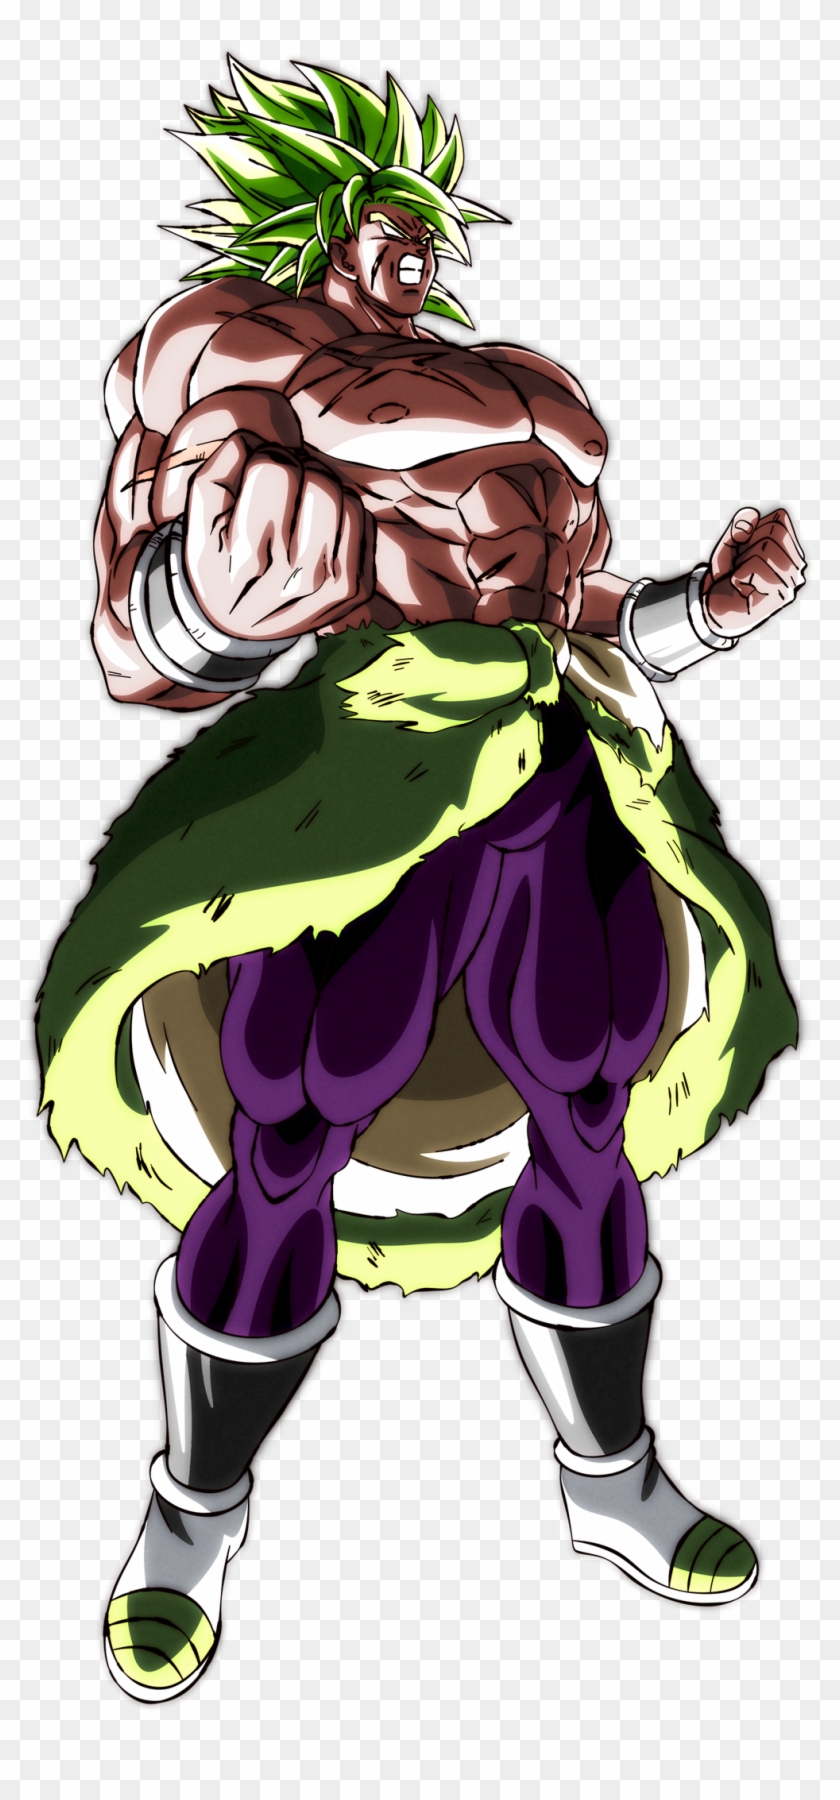 Universe 3 - The one and only Legendary Super Saiyan, Dragon Ball  Multiverse Wiki